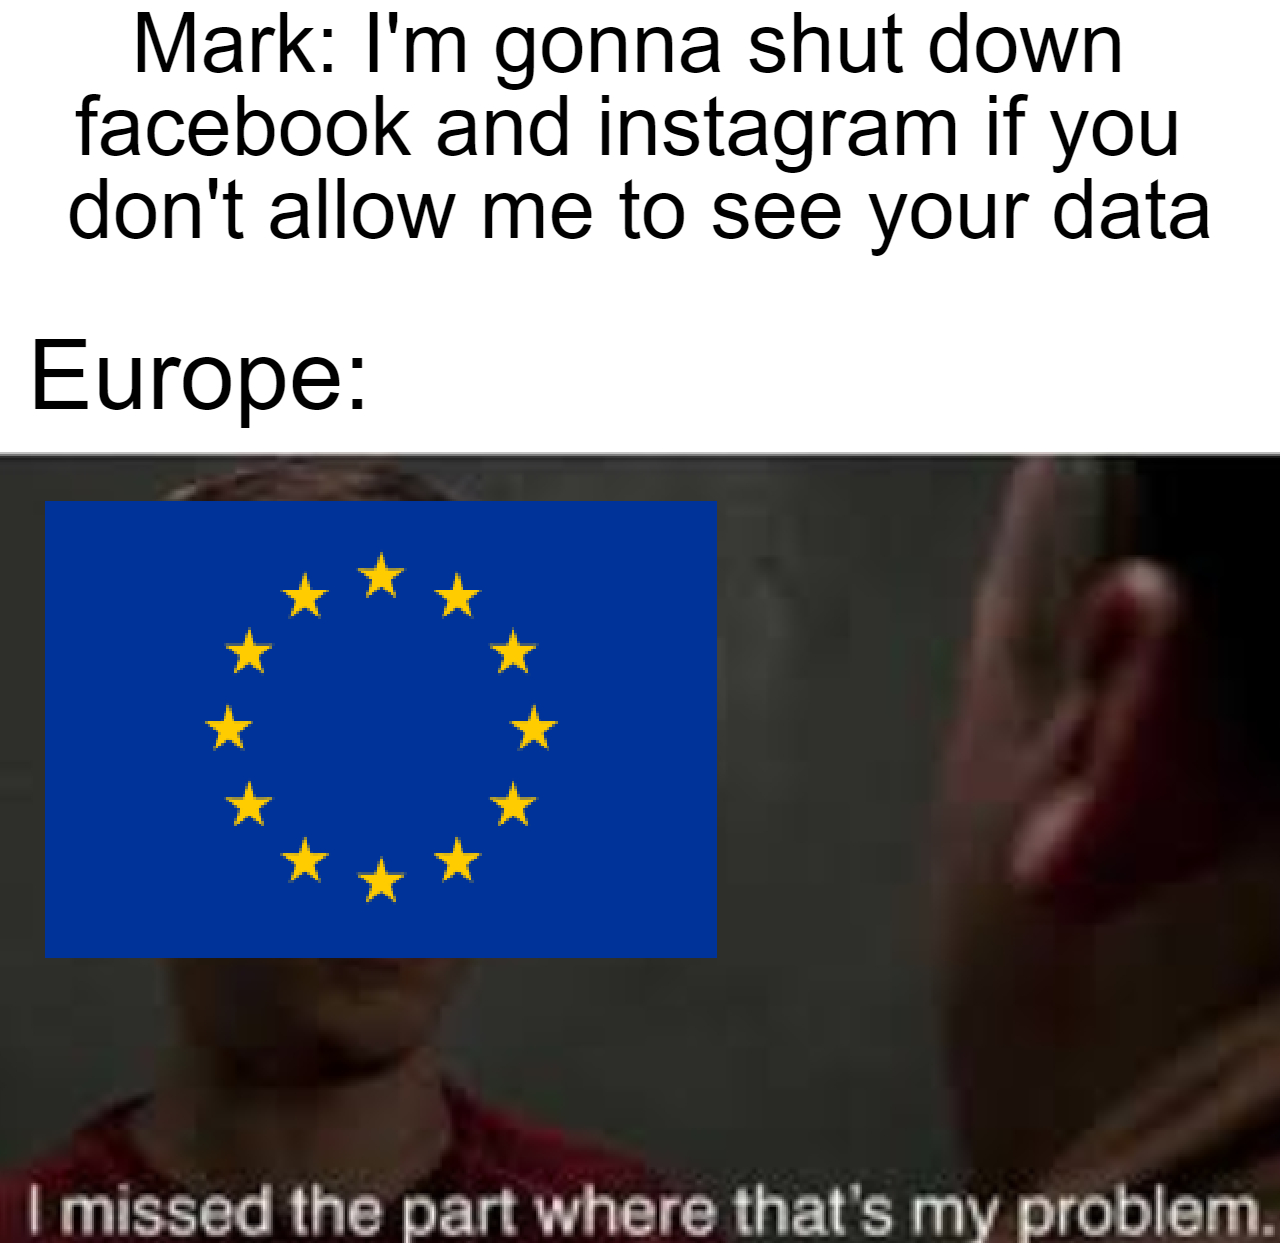 gaming memes - funny - Mark I'm gonna shut down facebook and instagram if you don't allow me to see your data Europe I missed the part where that's my problem.